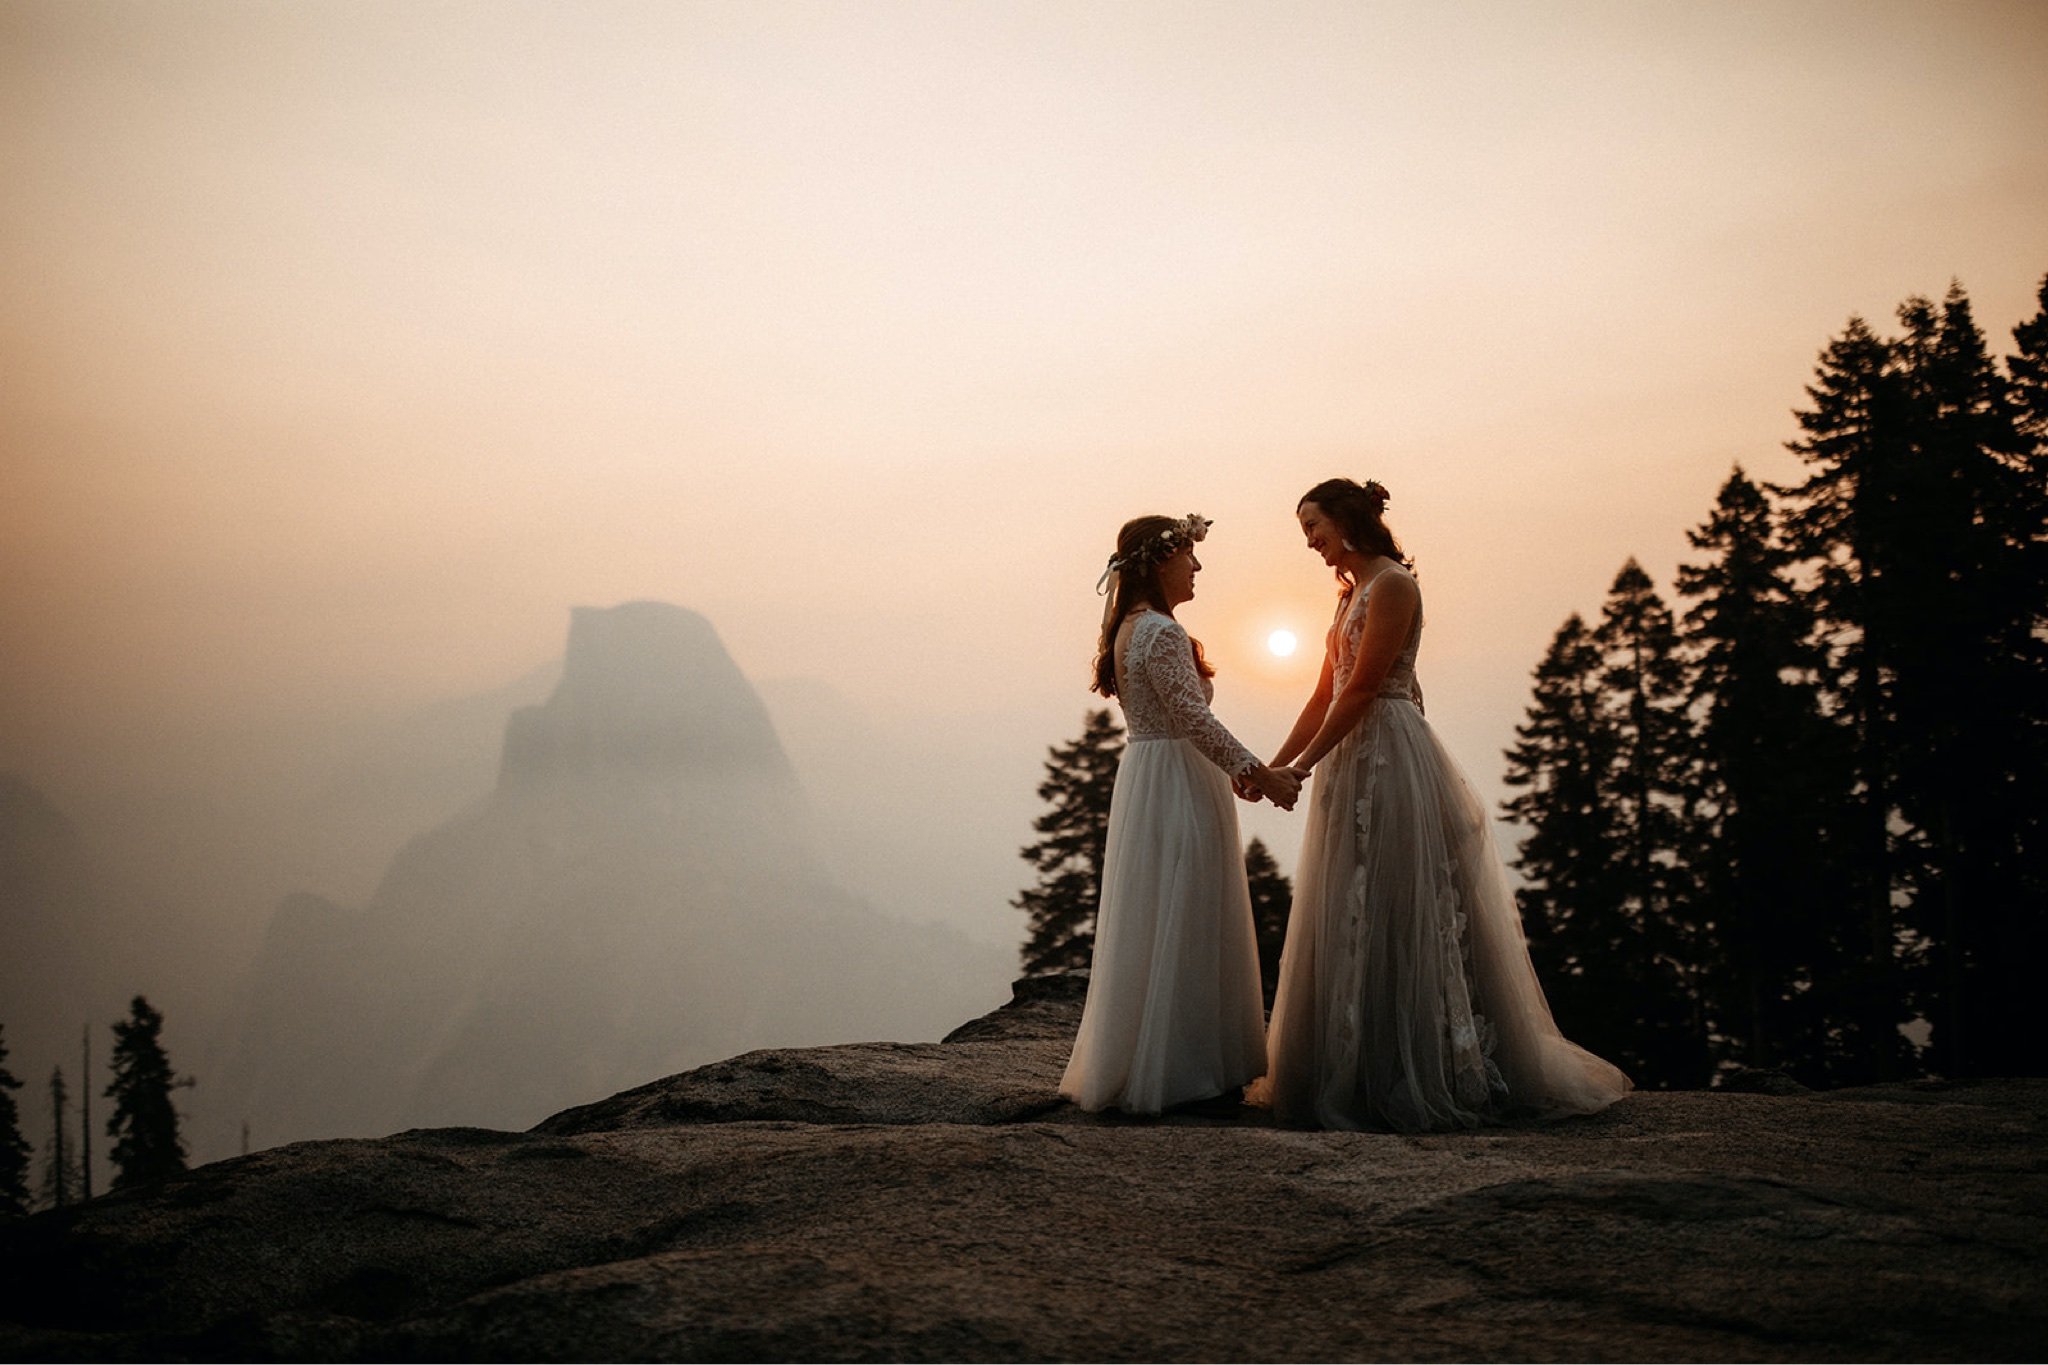 Yosemite National Park Elopement with Two Brides-Will Khoury73.jpg